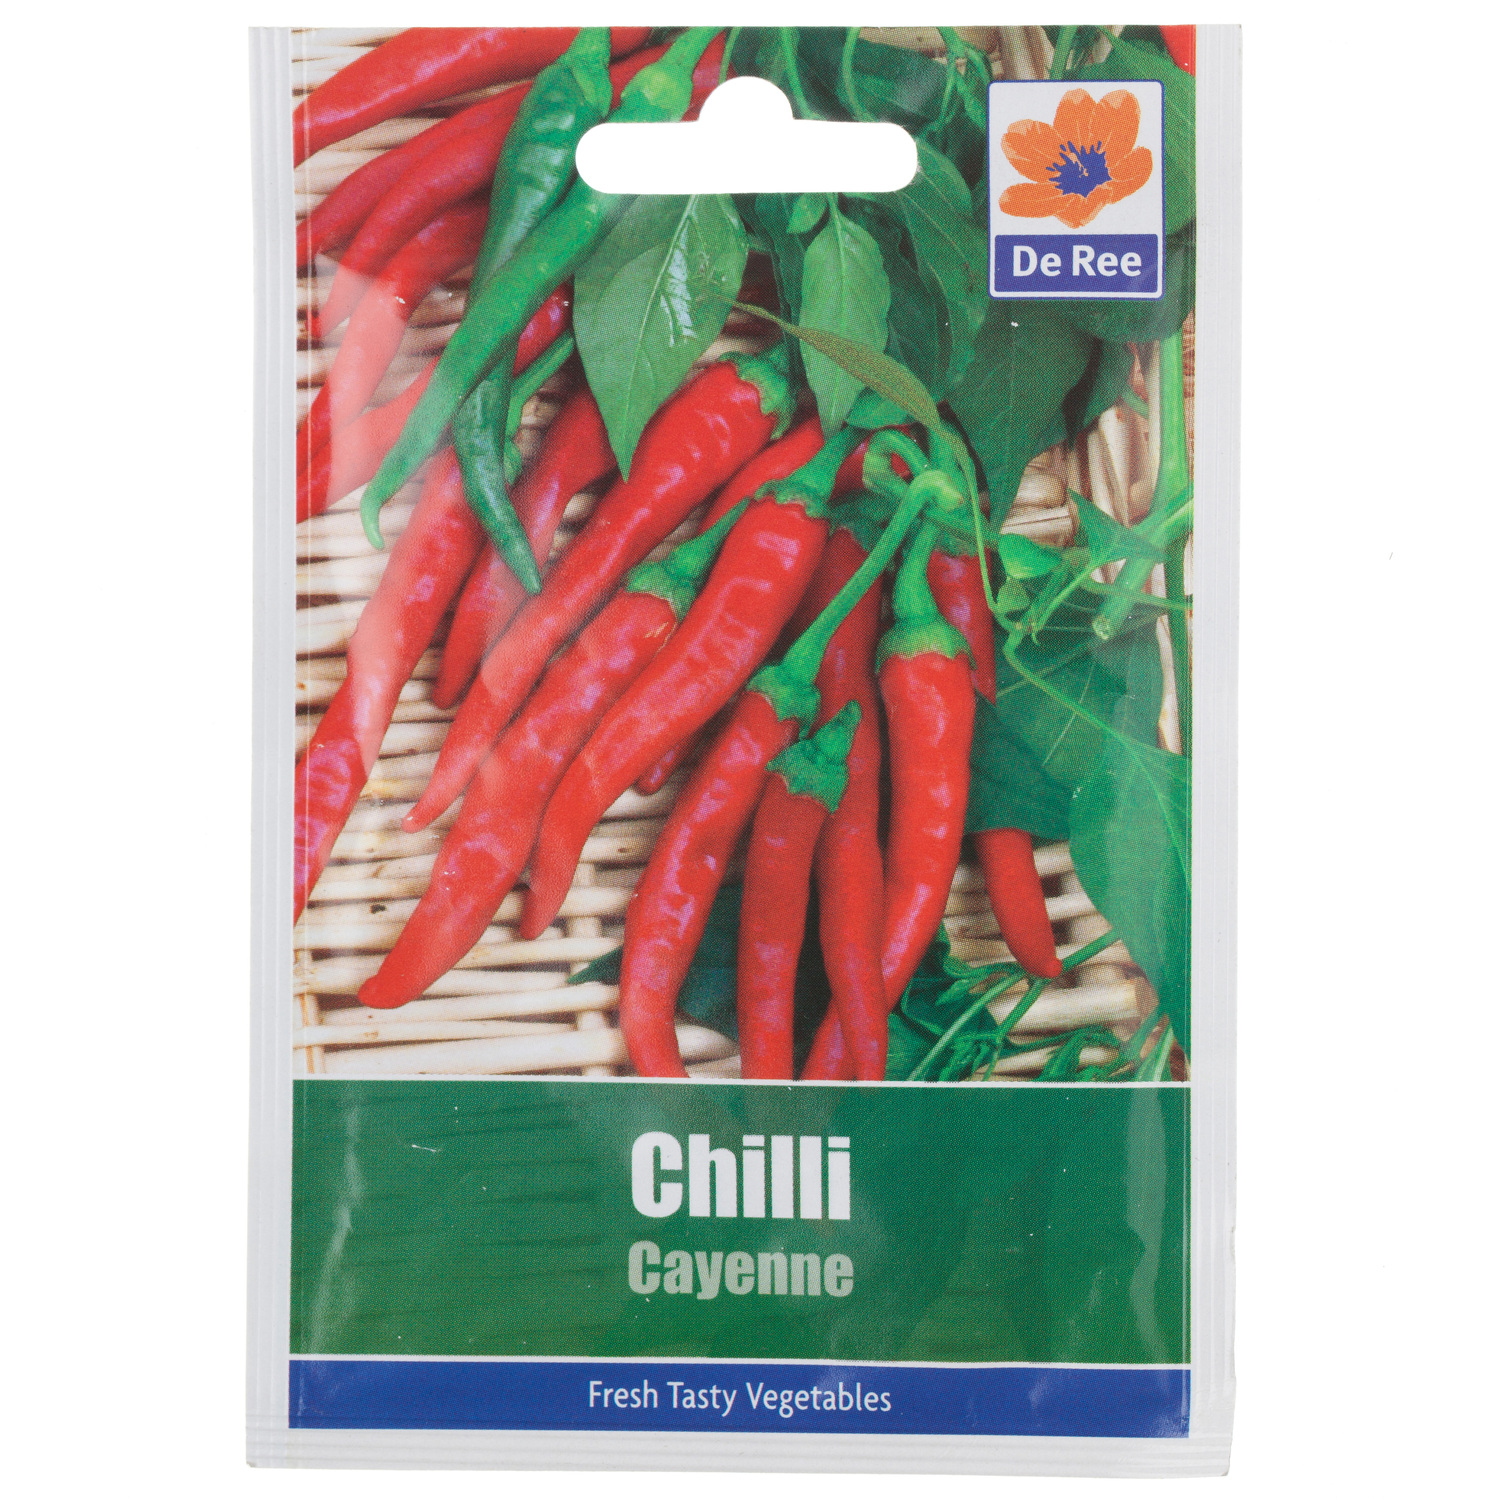 Chilli Cayenne Seed Packet Image